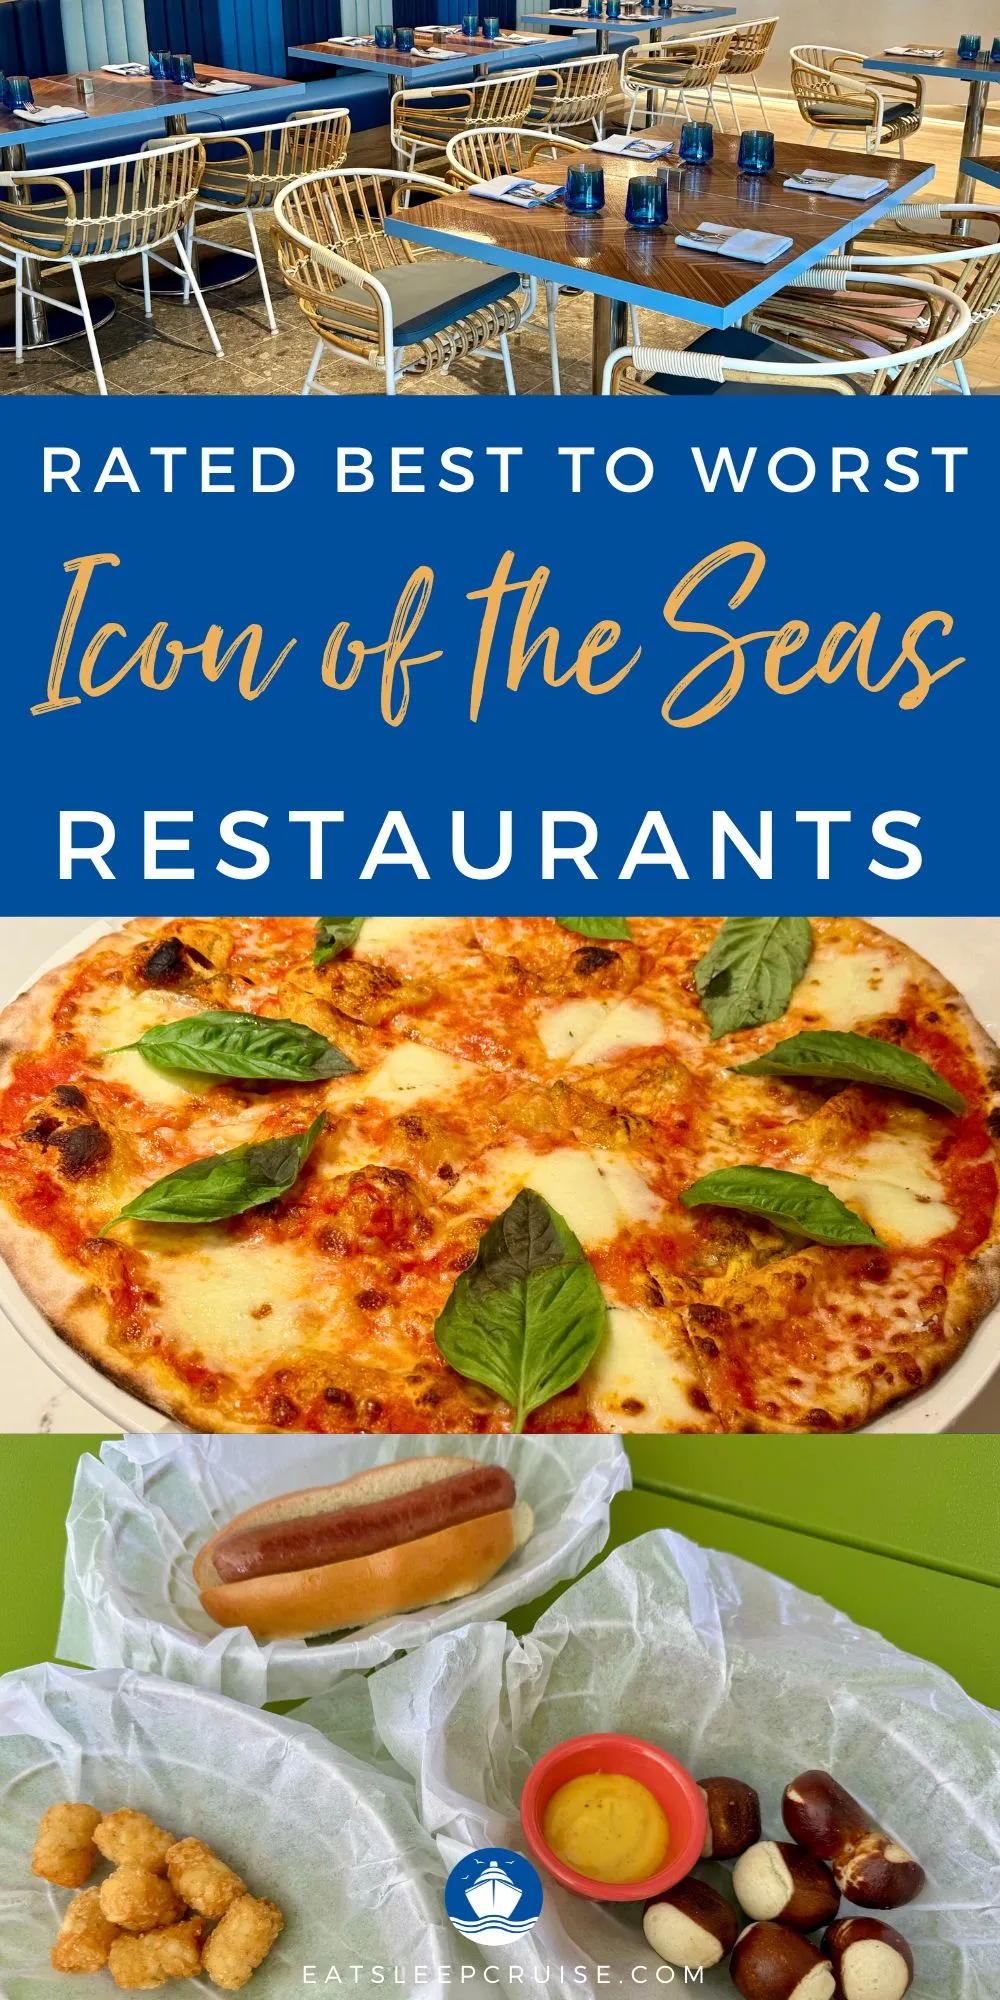 Icon of the Seas Restaurants Rated